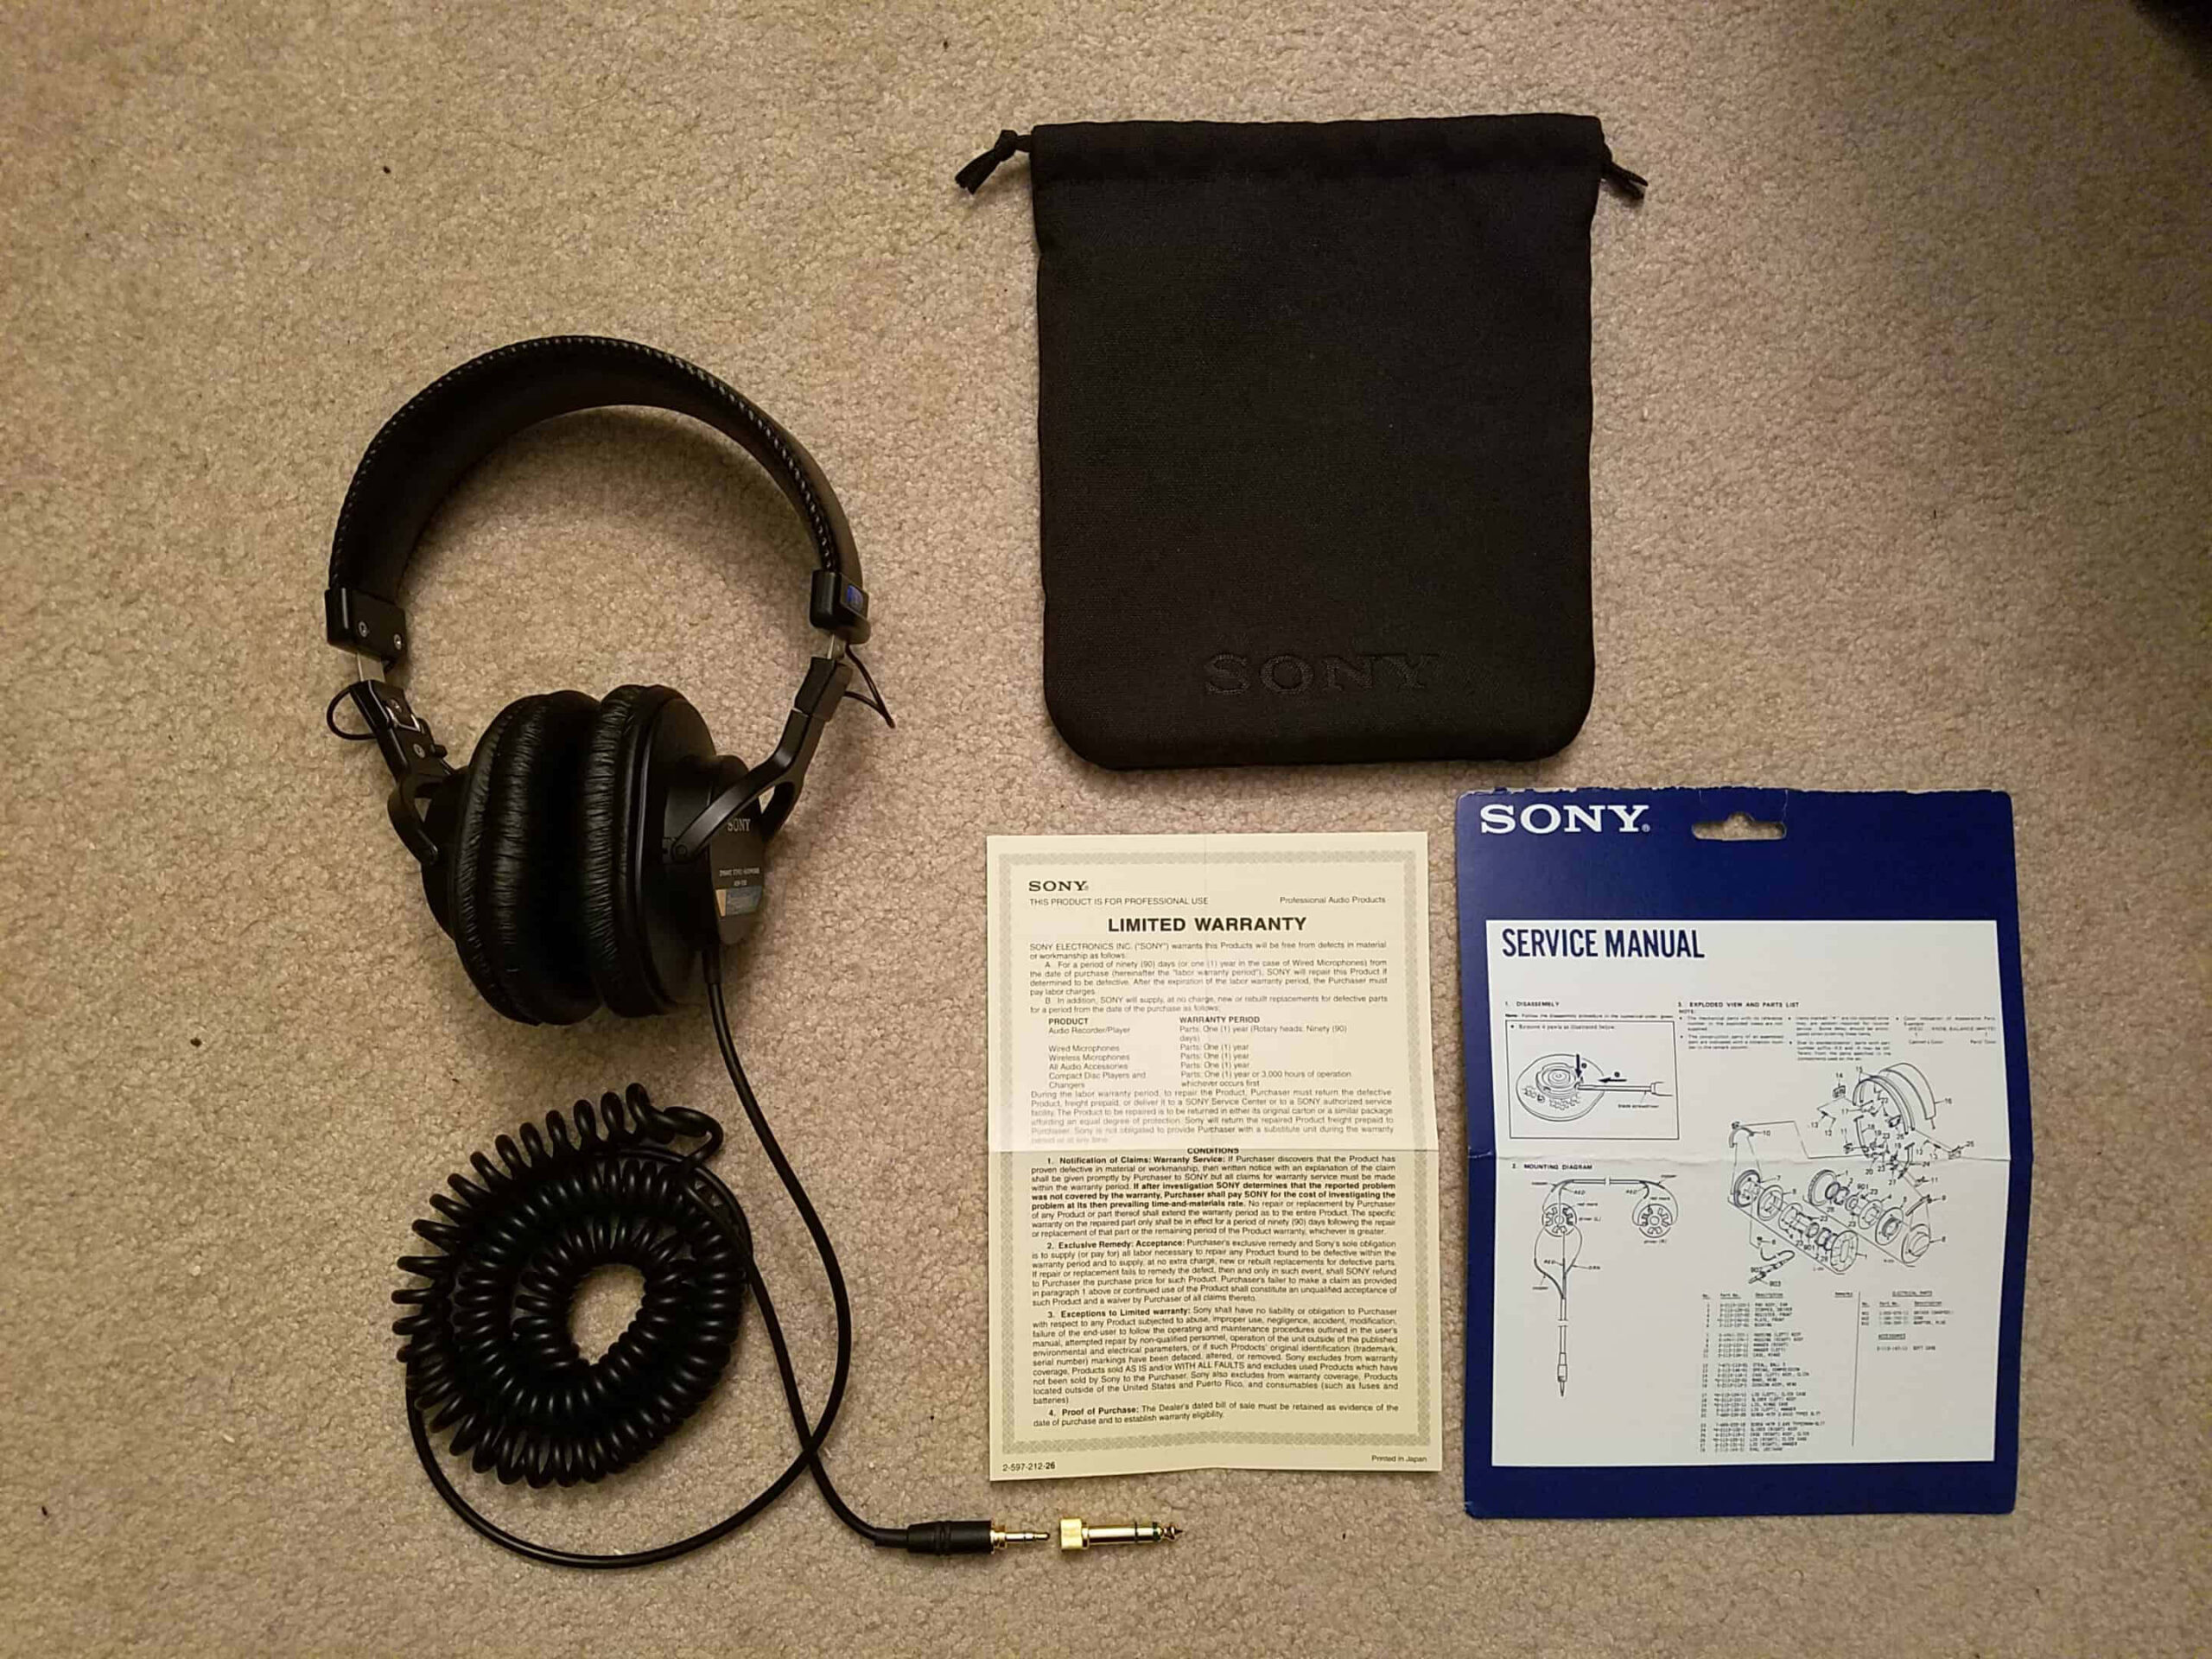 unboxing Sony MDR-7506